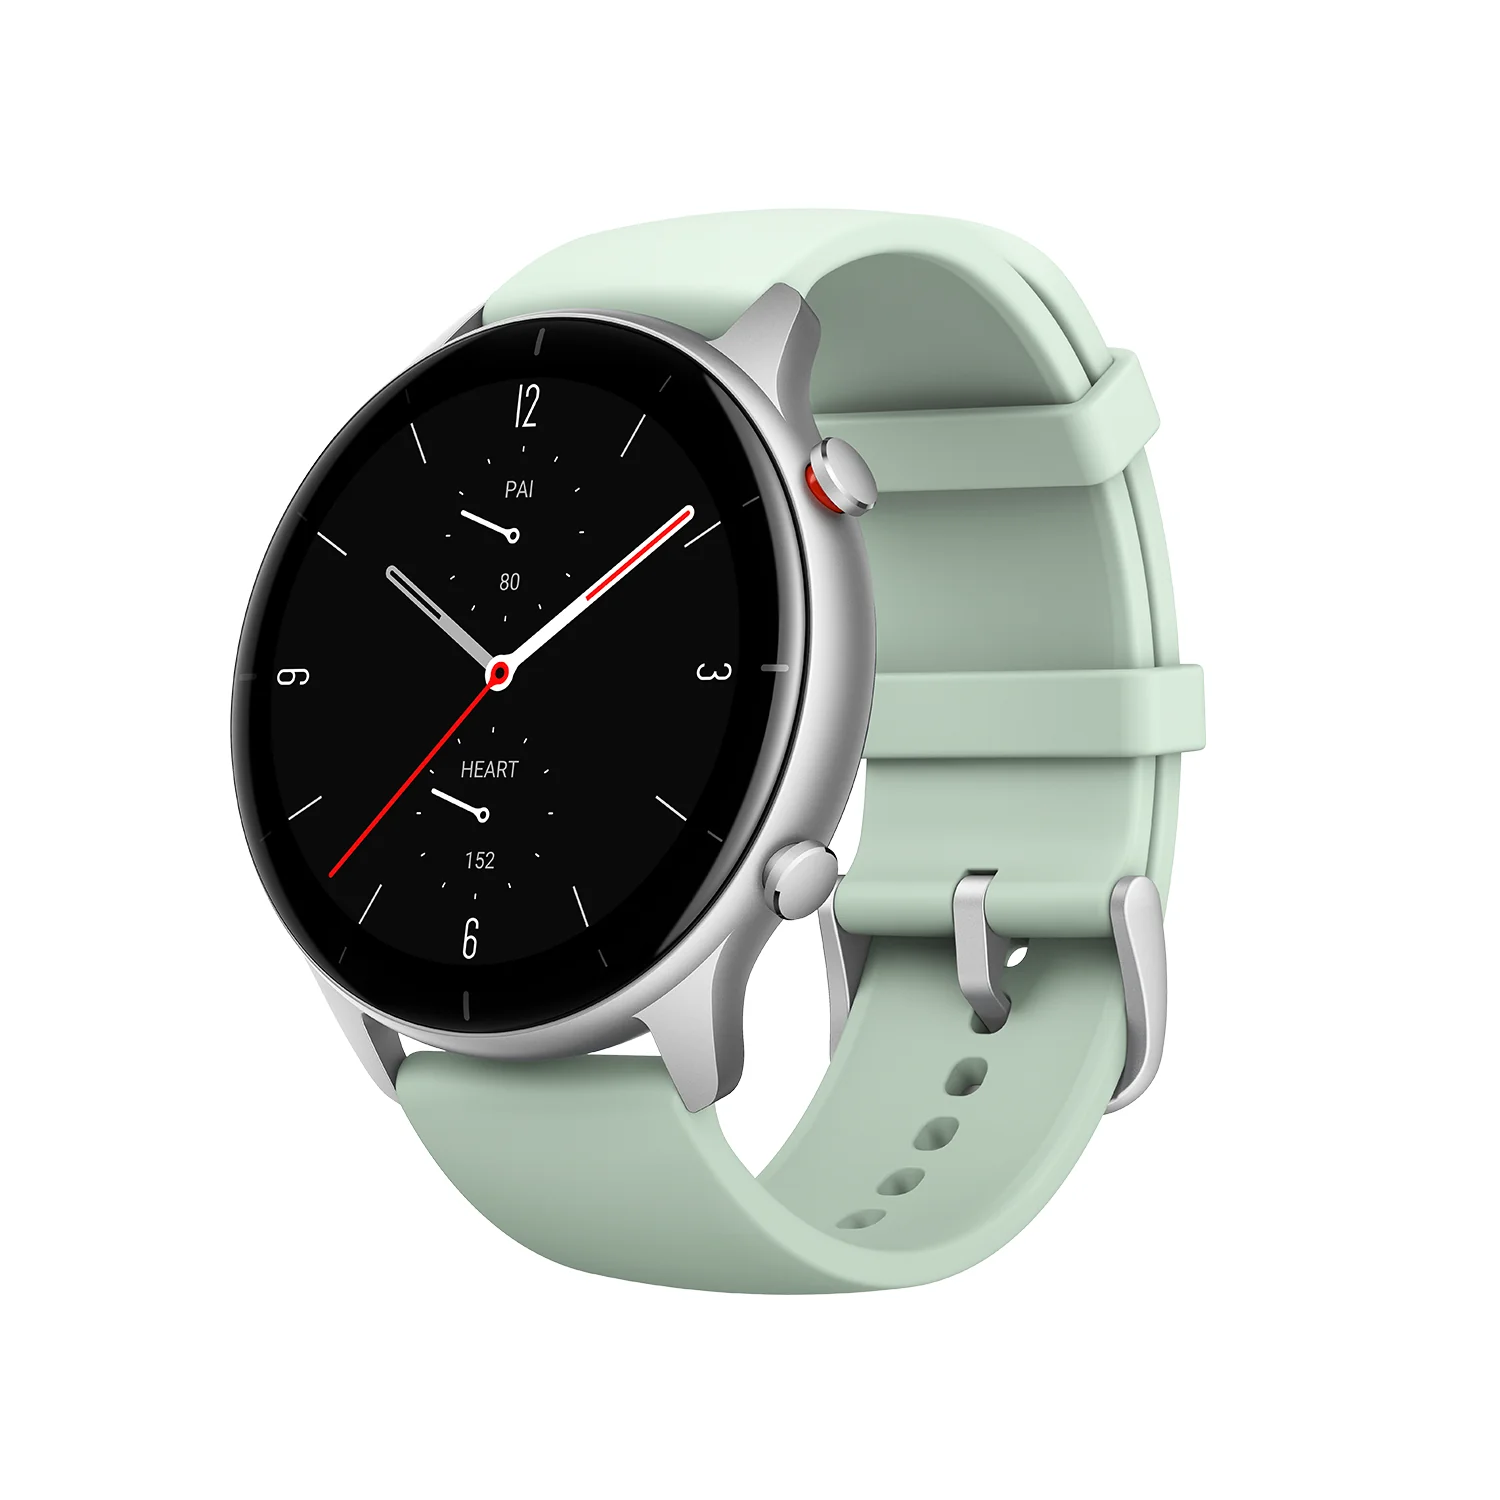 Amazfit GTR 2e Specifications and Features